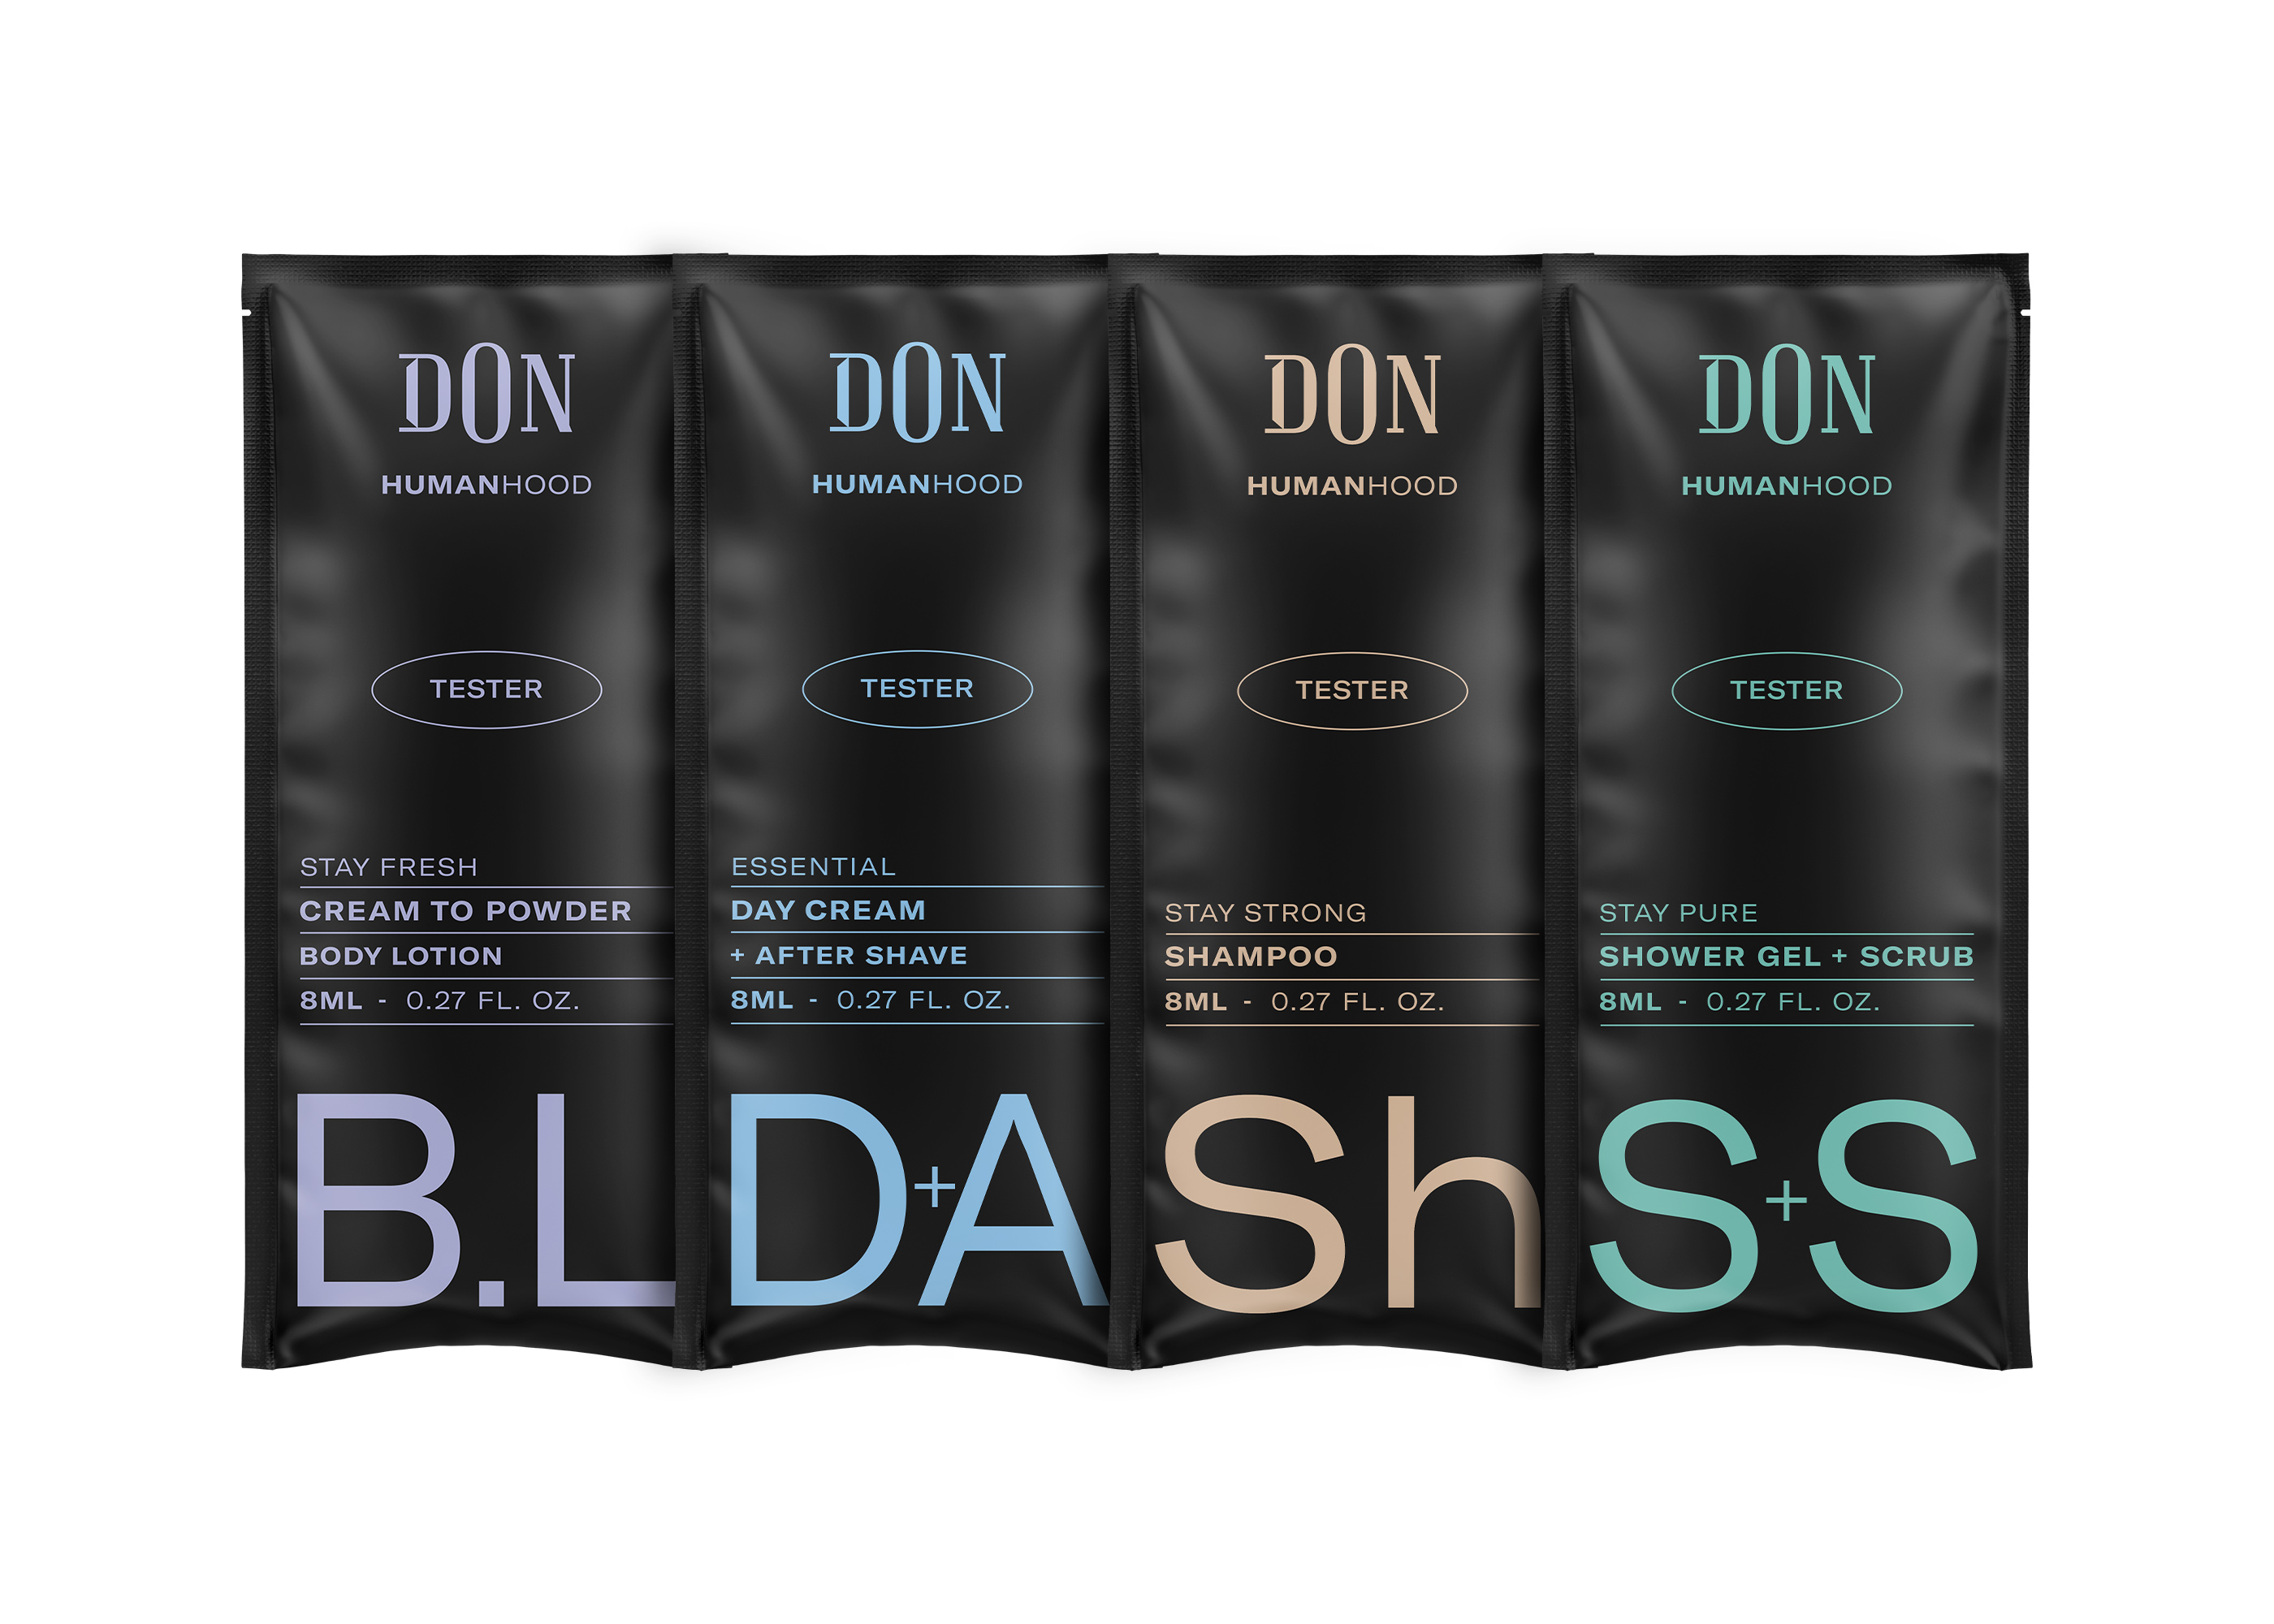 don cosmetics packaging all testers kommigraphics